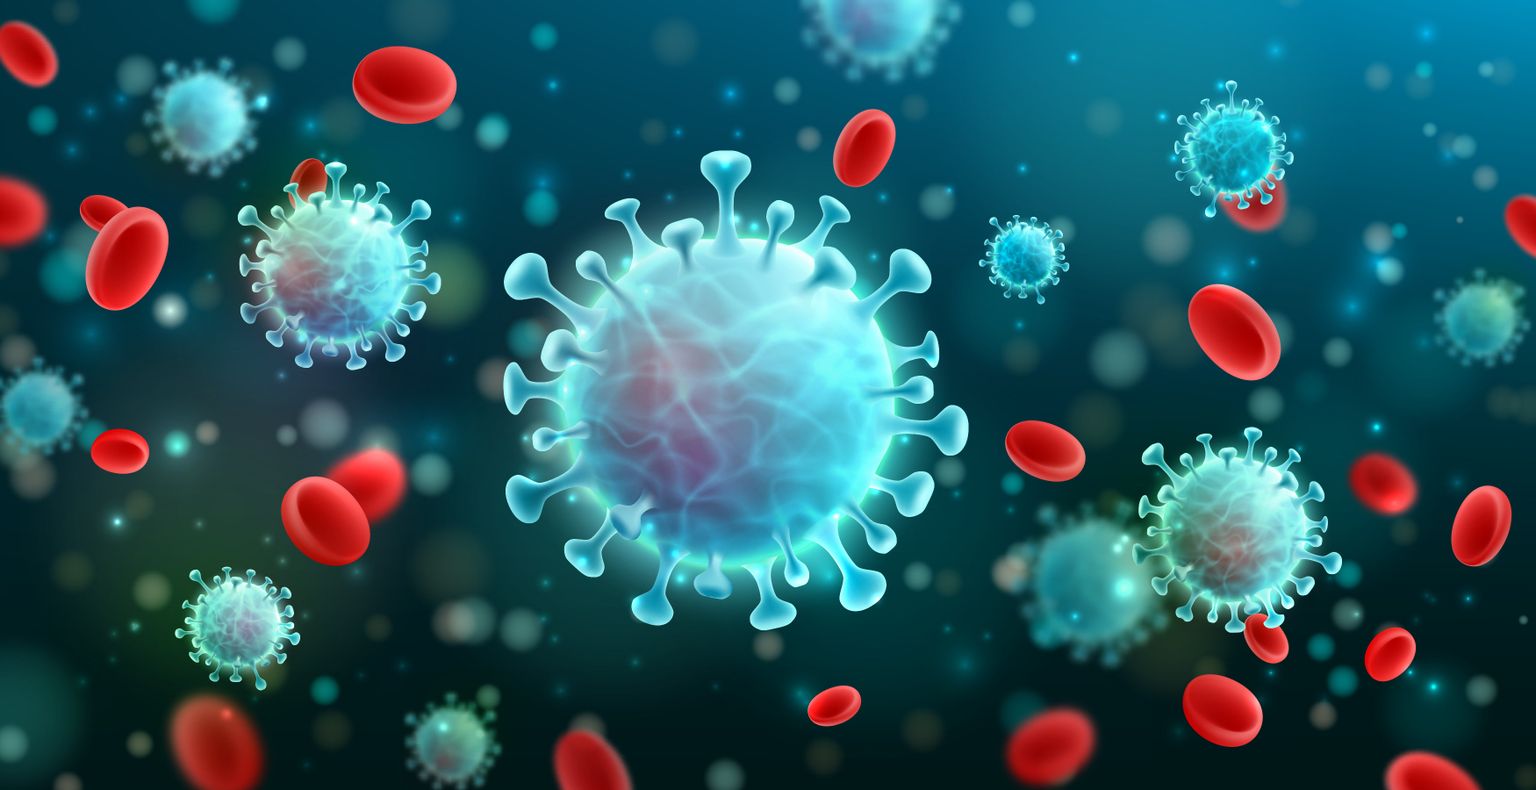 Vector illustration of coronavirus 2019-nCoV and virus background with disease cells and red blood cells.COVID-19 corona virus outbreak and pandemic concept for medical healthcare